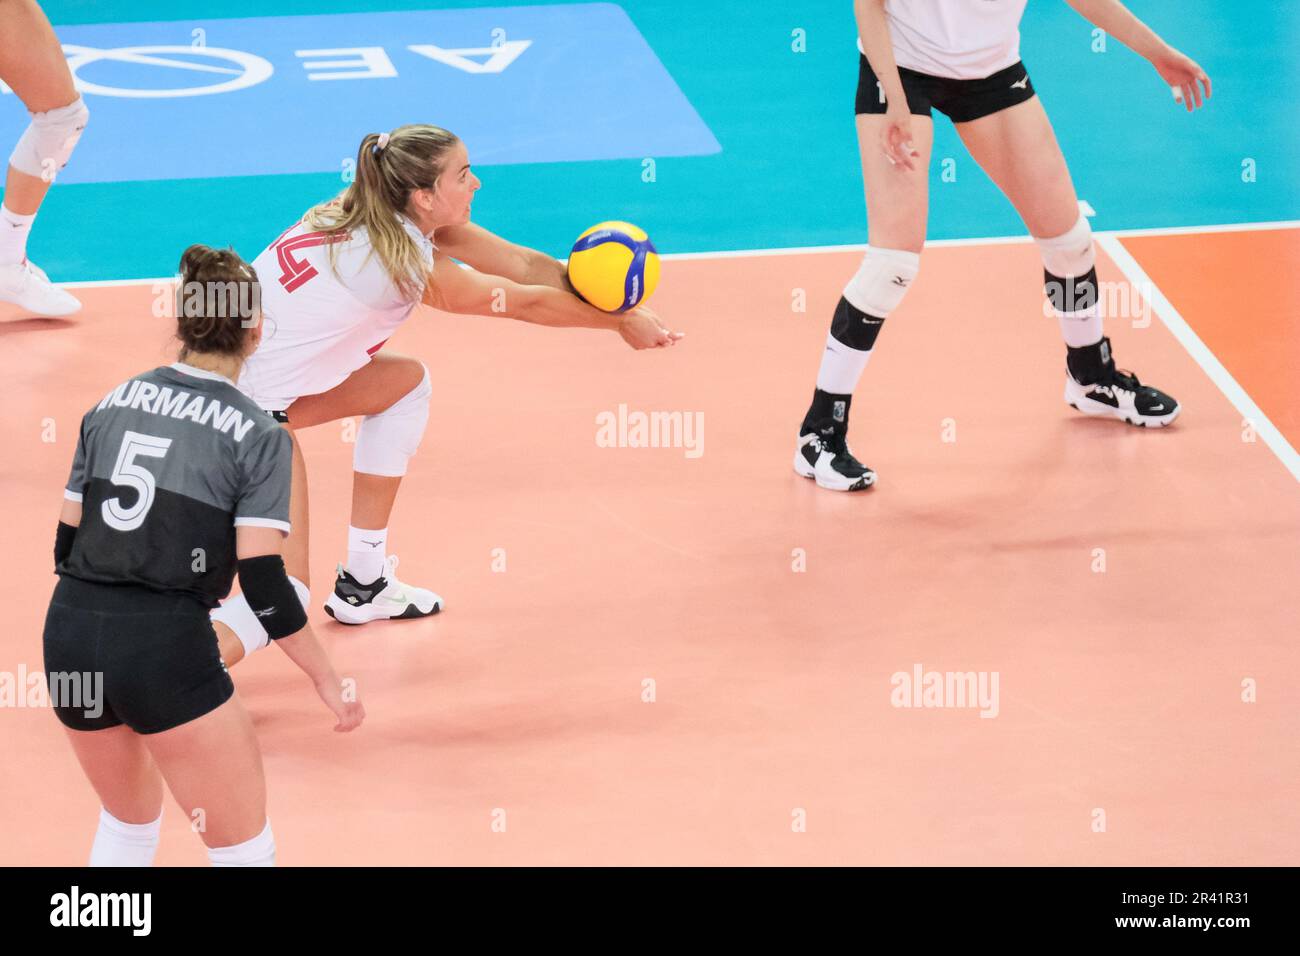 Hilary Howe of Canada in action during the DHL Test Match Tournament women’s volleyball between Italy and Canada at Palazzetto dello Sport. Final score; Italy 3:1 Canada. Stock Photo